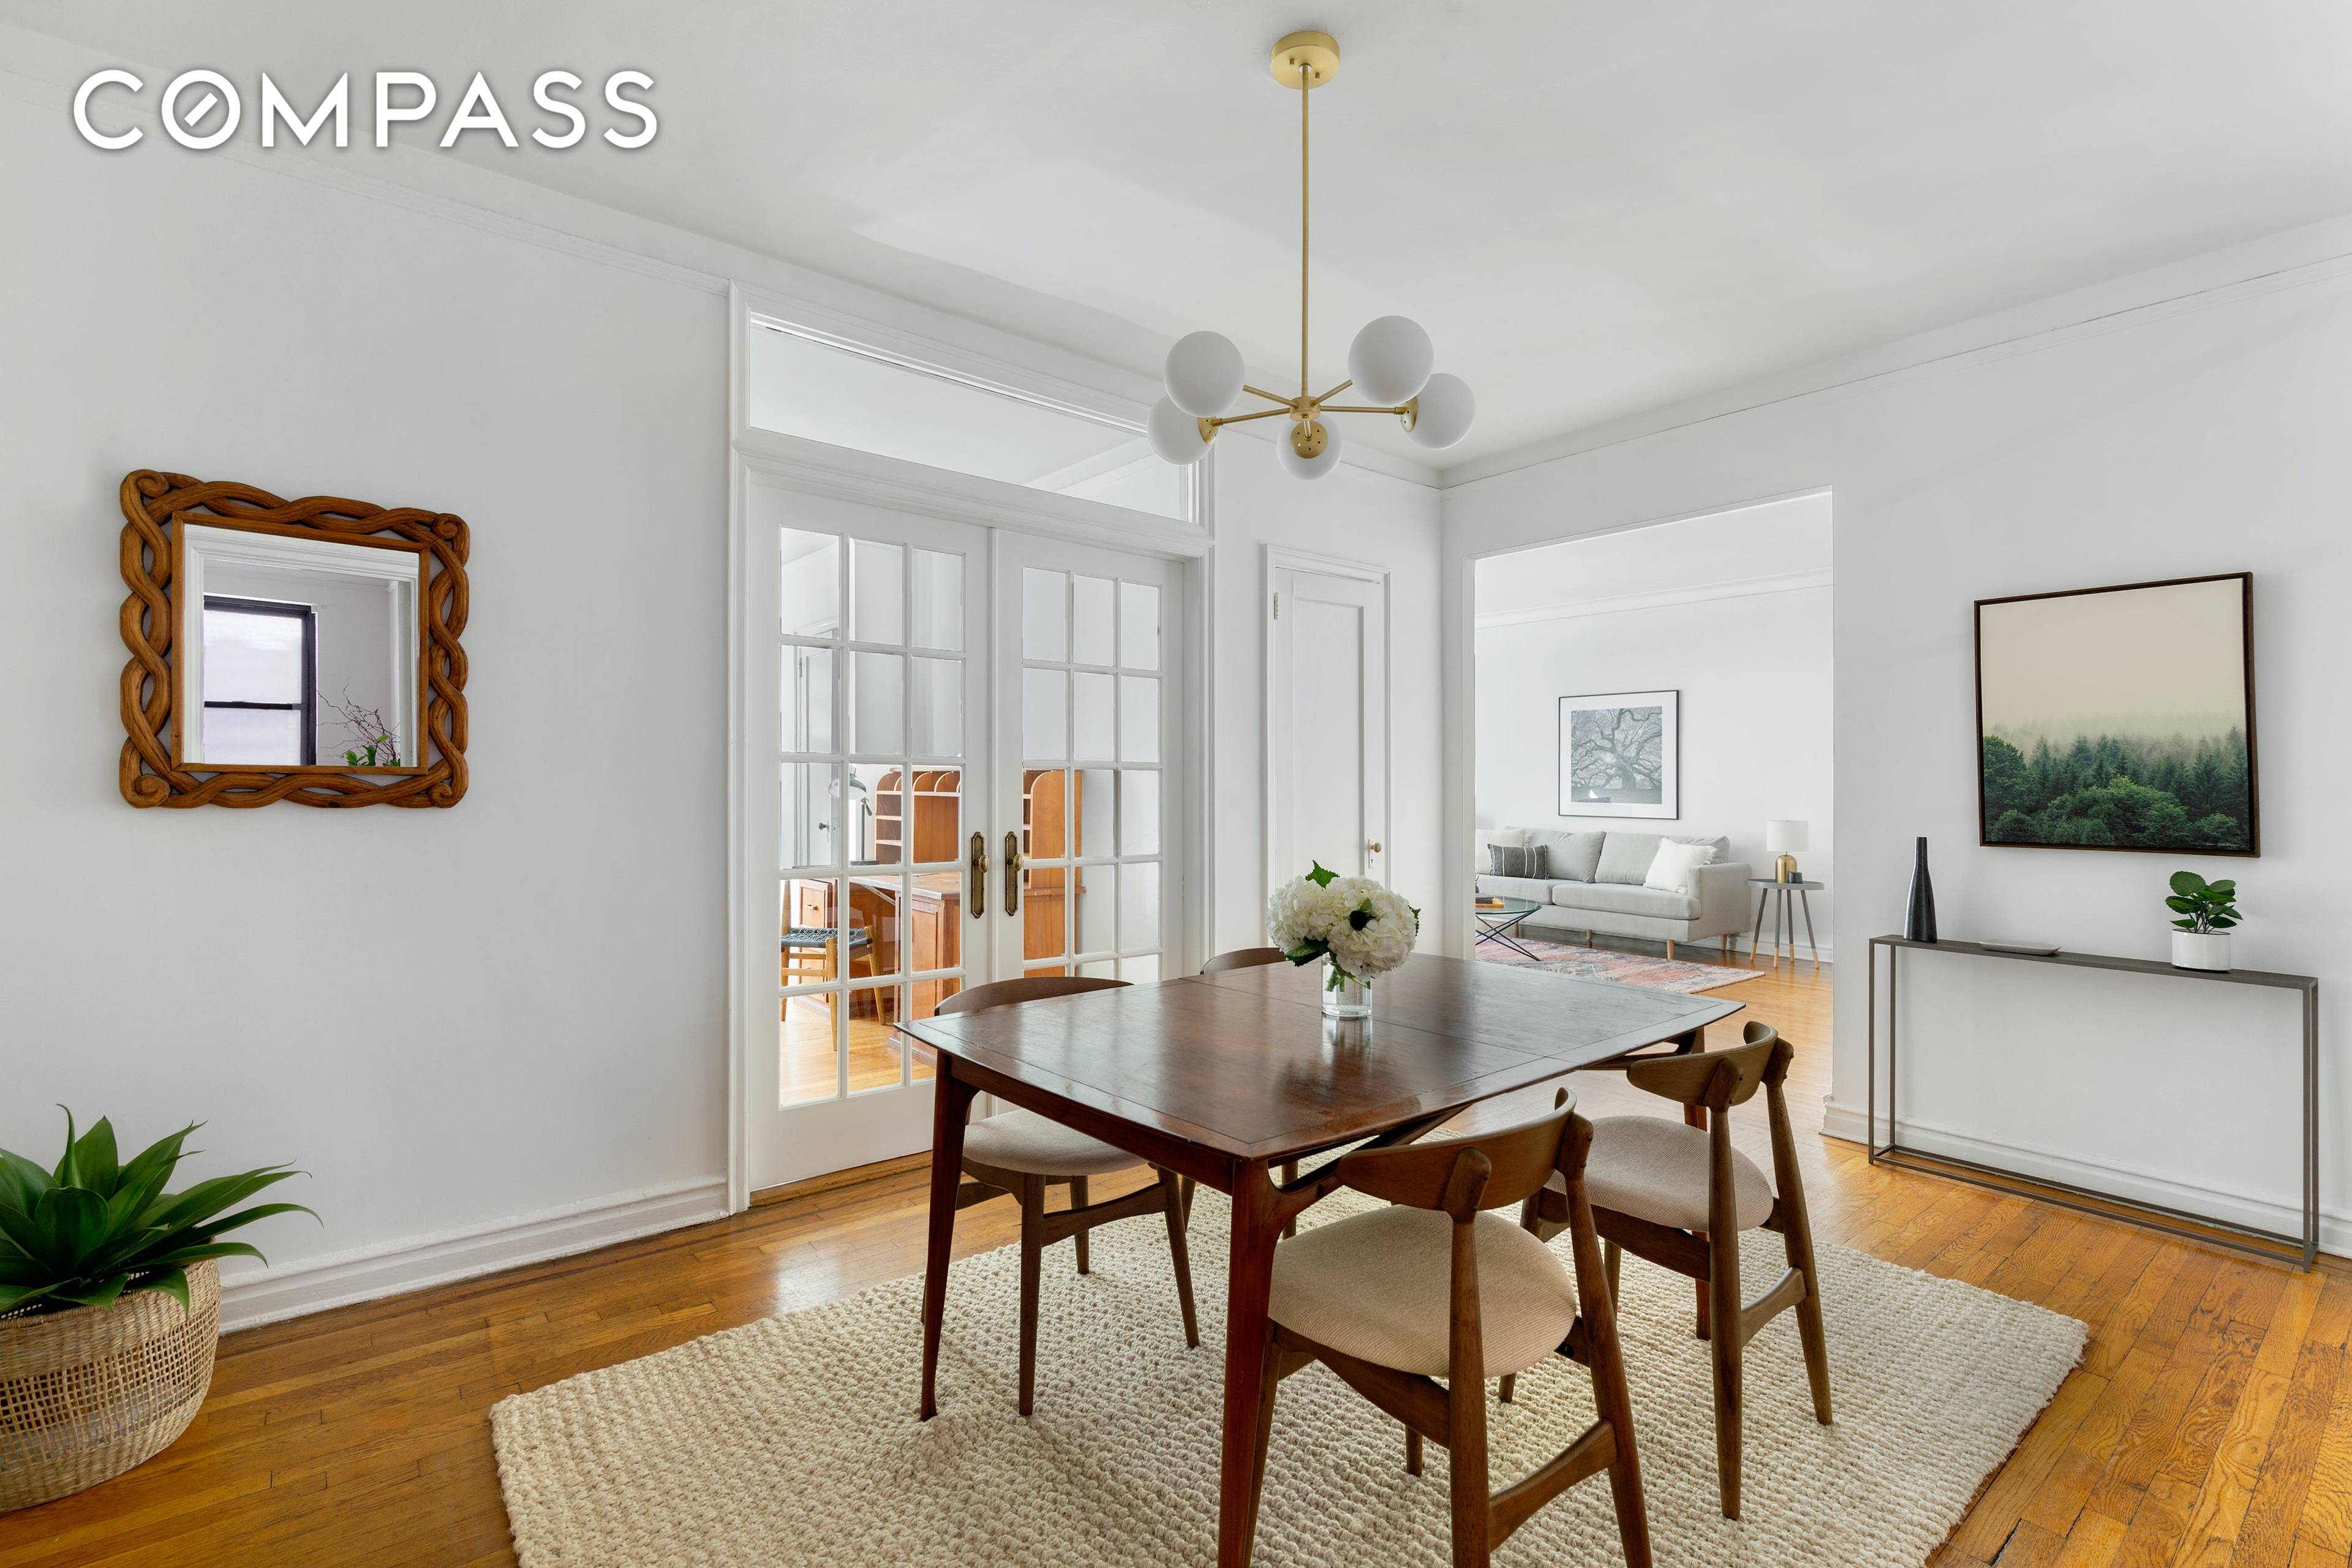 With a gracious layout, pre war charm and modern updates, this 1600SF approx.